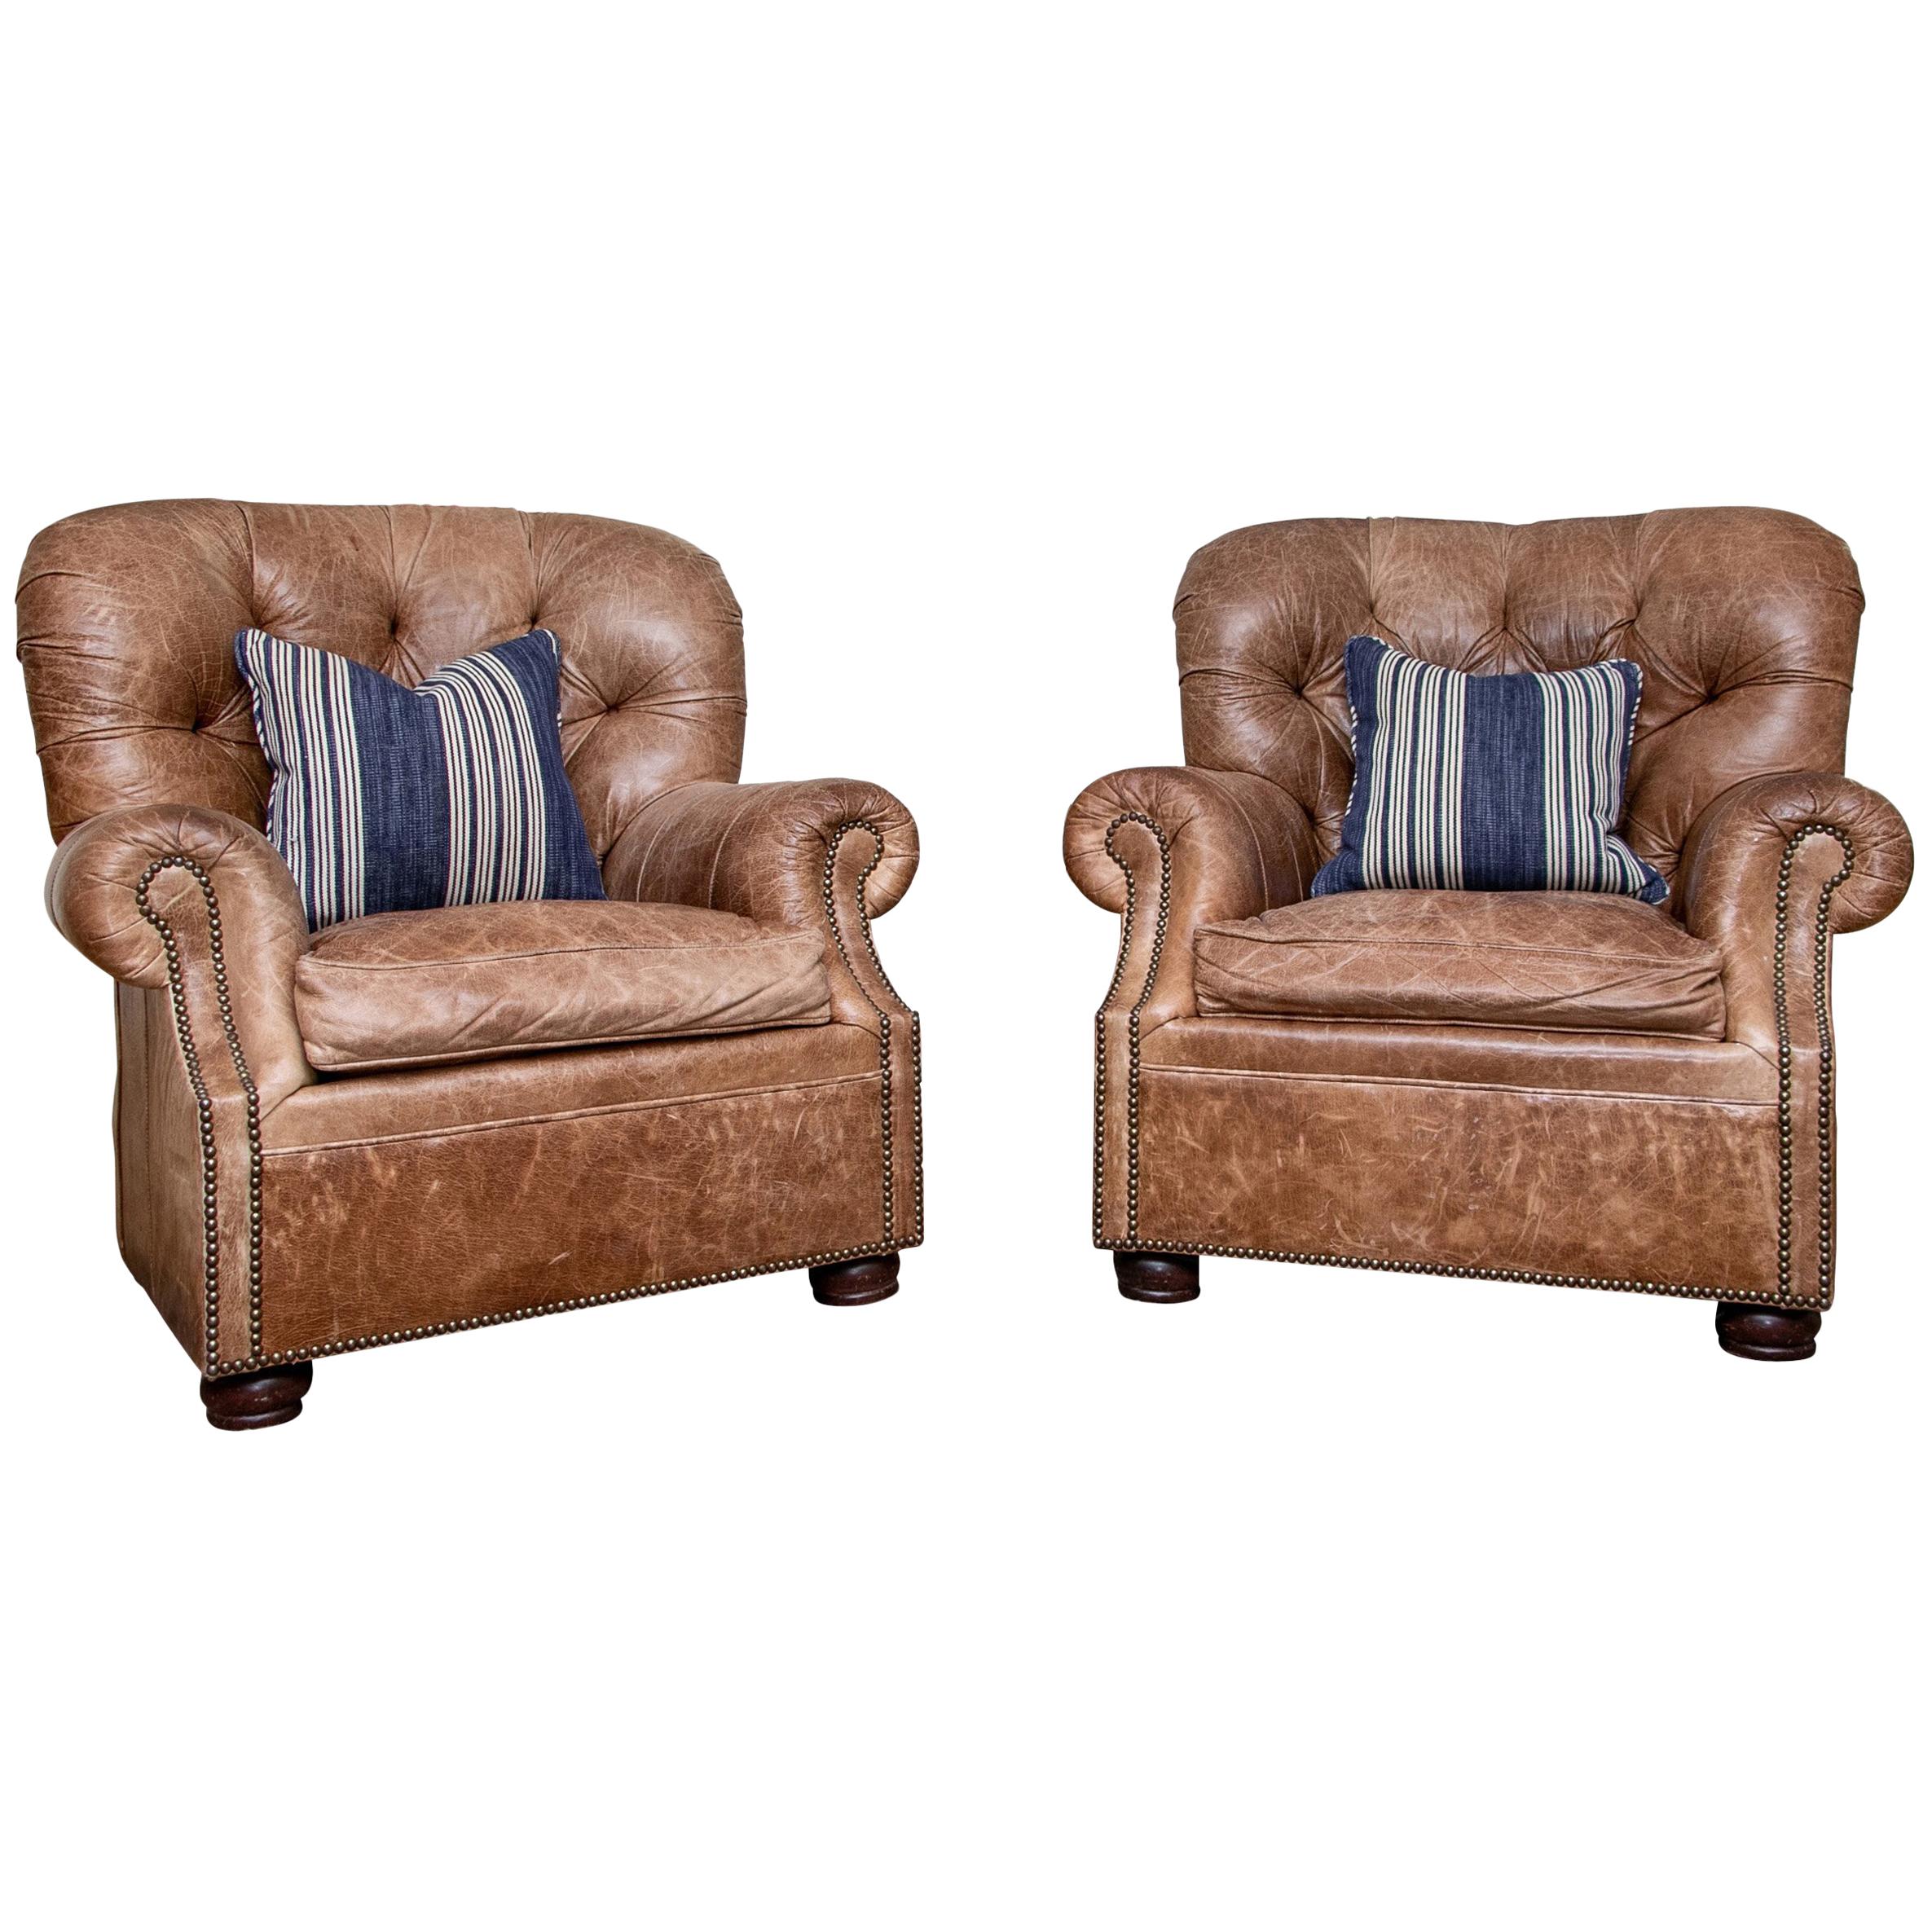 Fine Pair of Tufted Leather Library Club Chairs by Craftwork